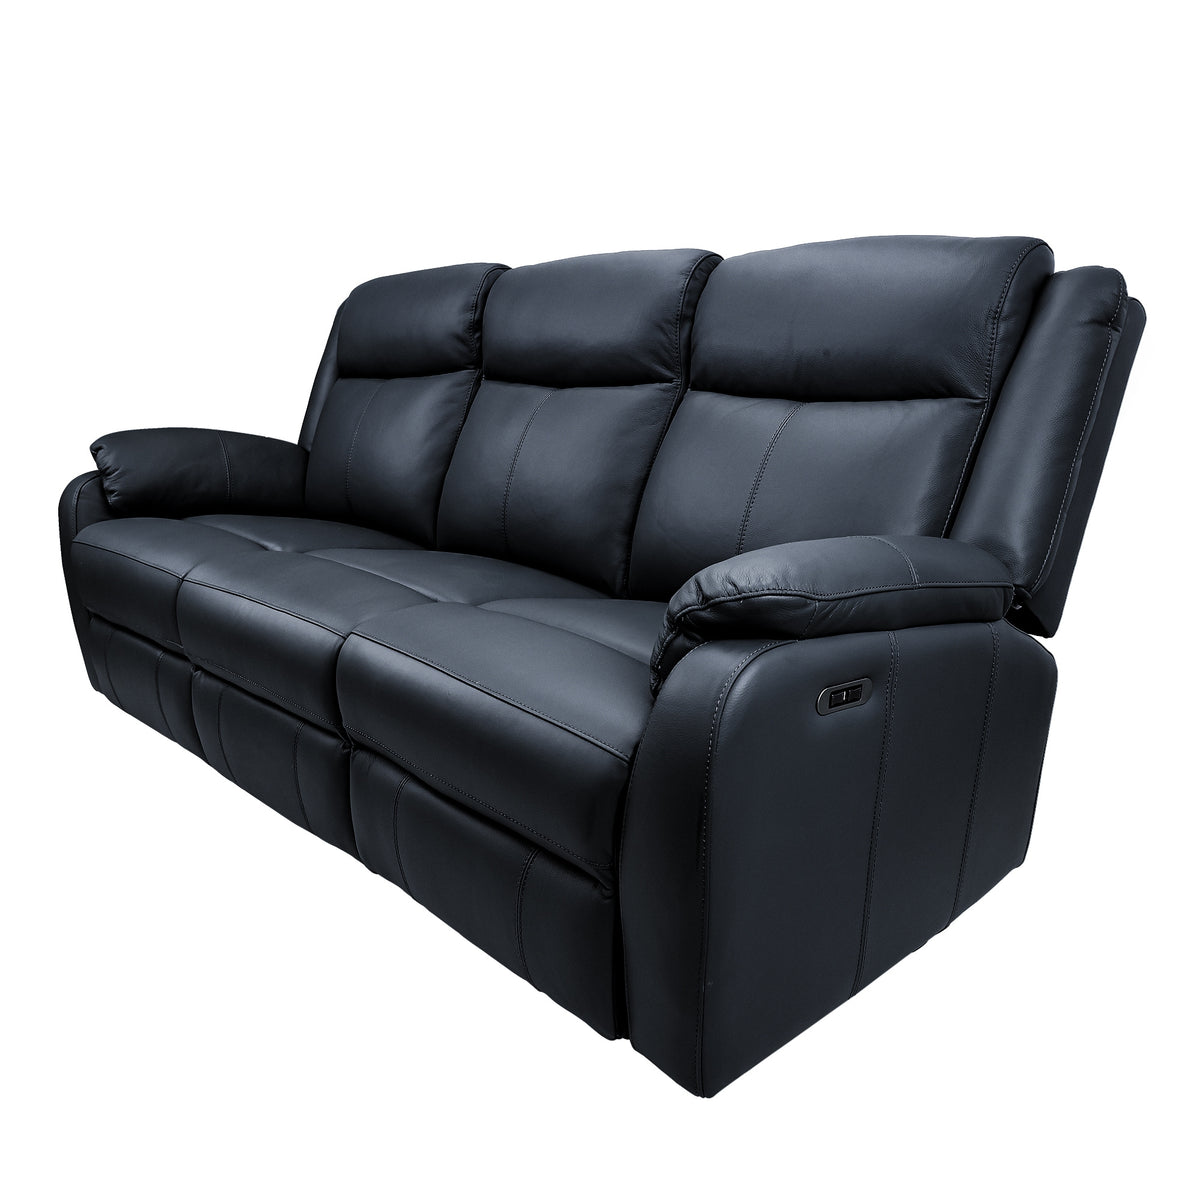 Bella 3 Seater Leather Electric Recliner Sofa Lounge Black 